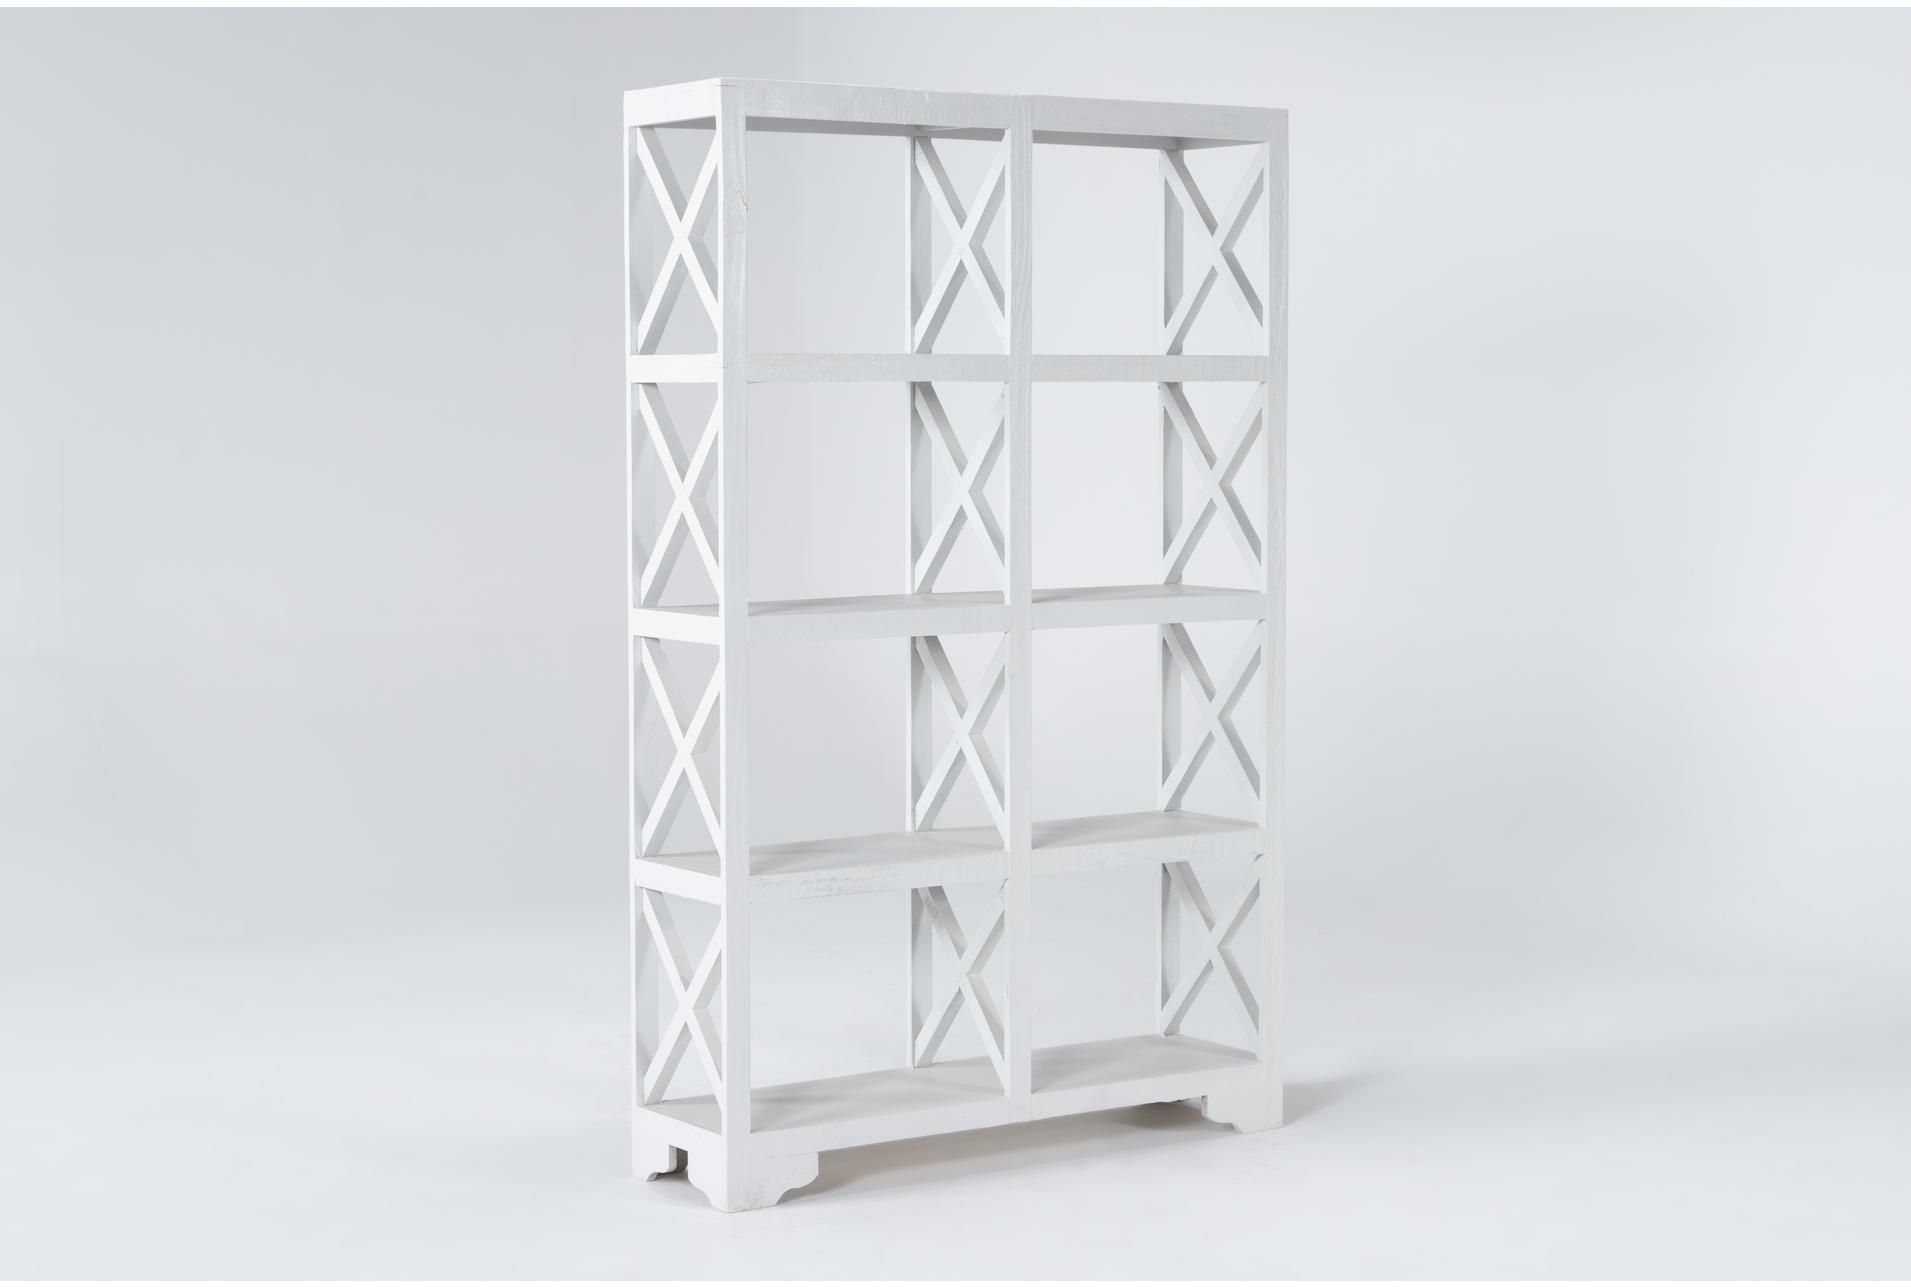 shabby look Room Divider With Shelves 170x125 show original title Details about   Room Divider Yvelines 